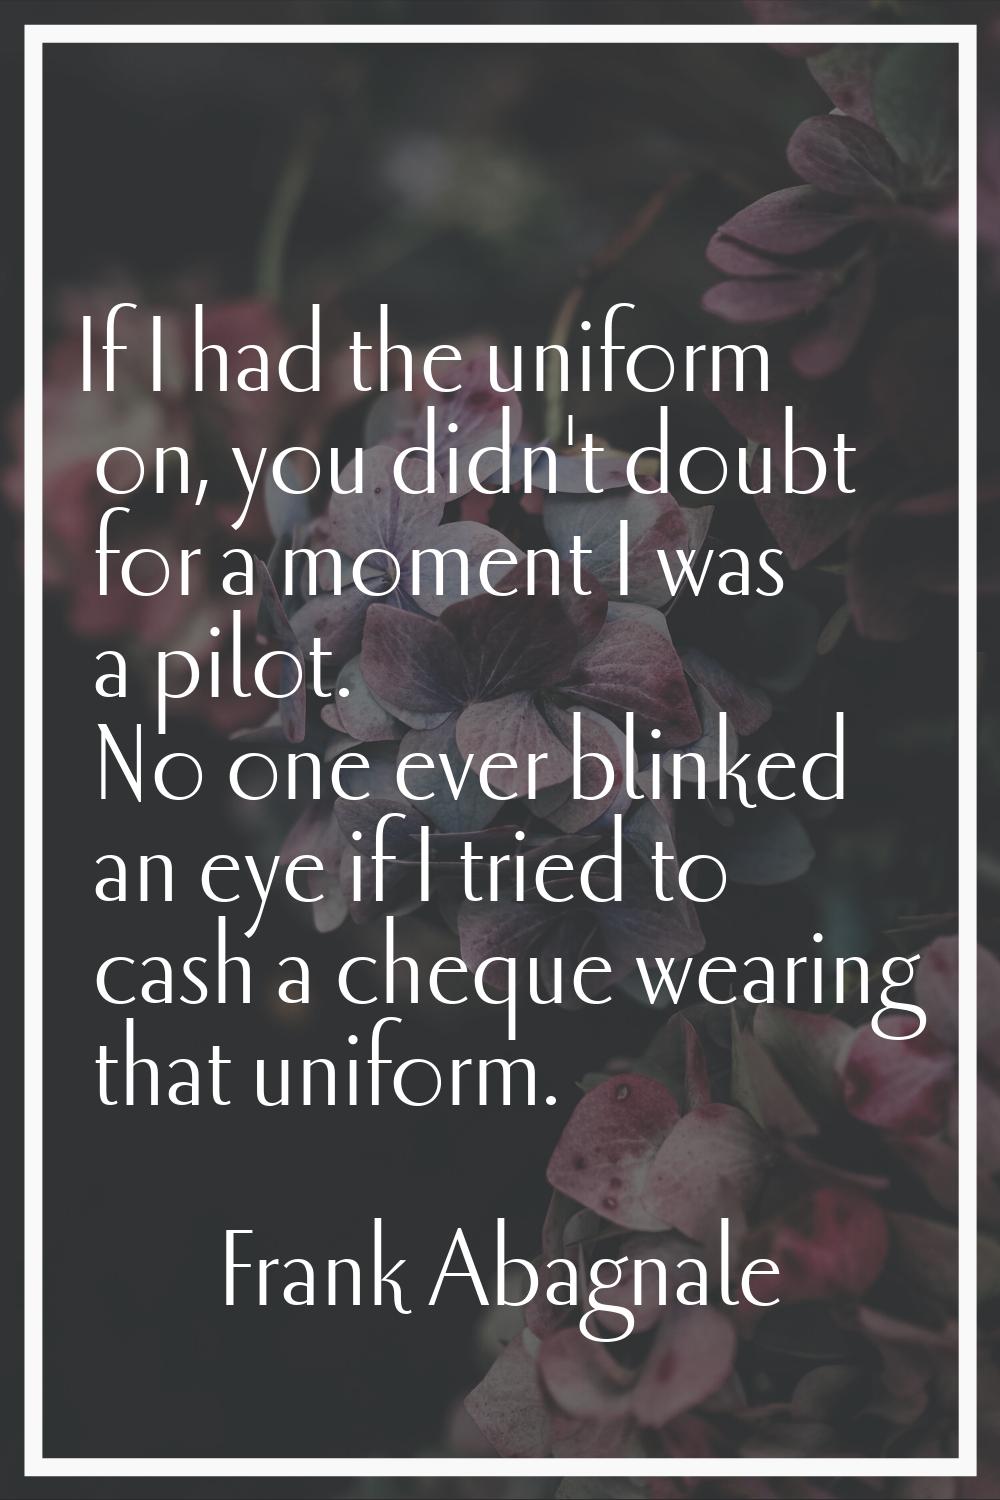 If I had the uniform on, you didn't doubt for a moment I was a pilot. No one ever blinked an eye if